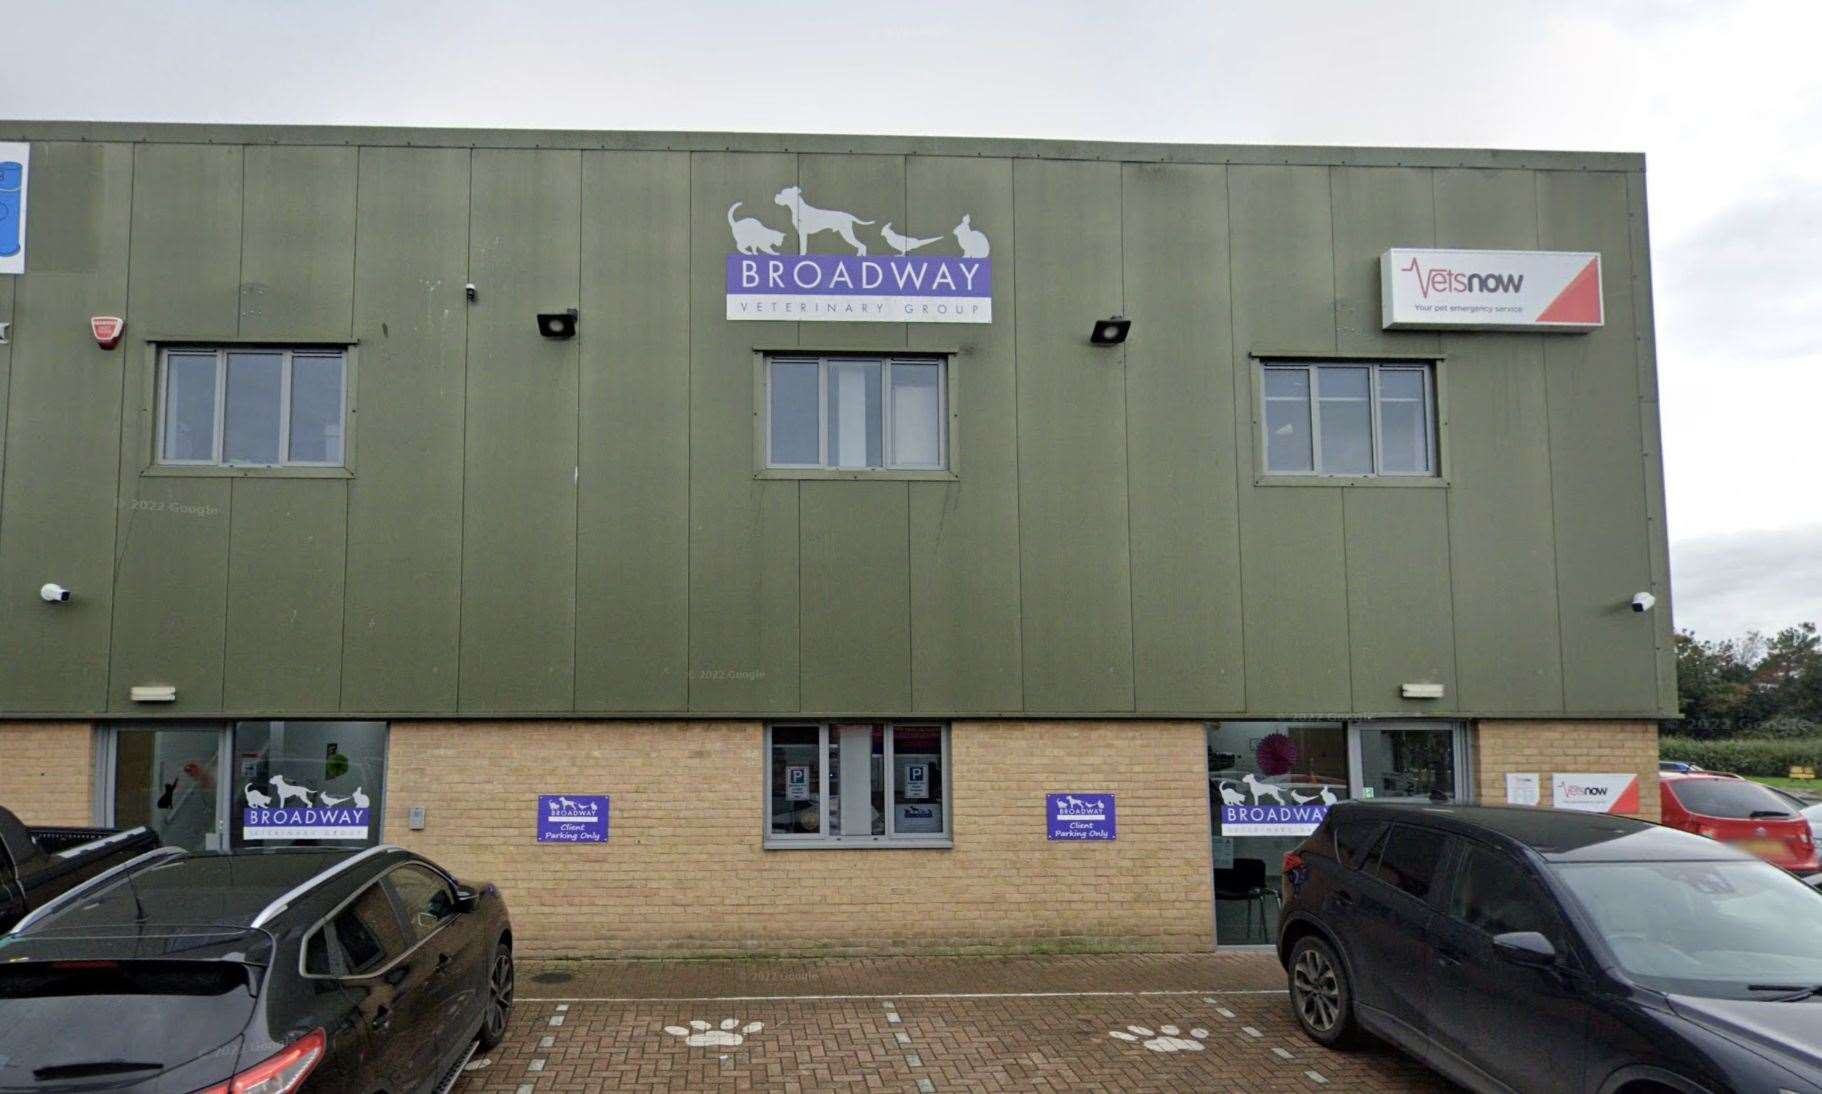 The Broadway Veterinary Group's also has a site in Herne Bay Business Park. Pic: Google